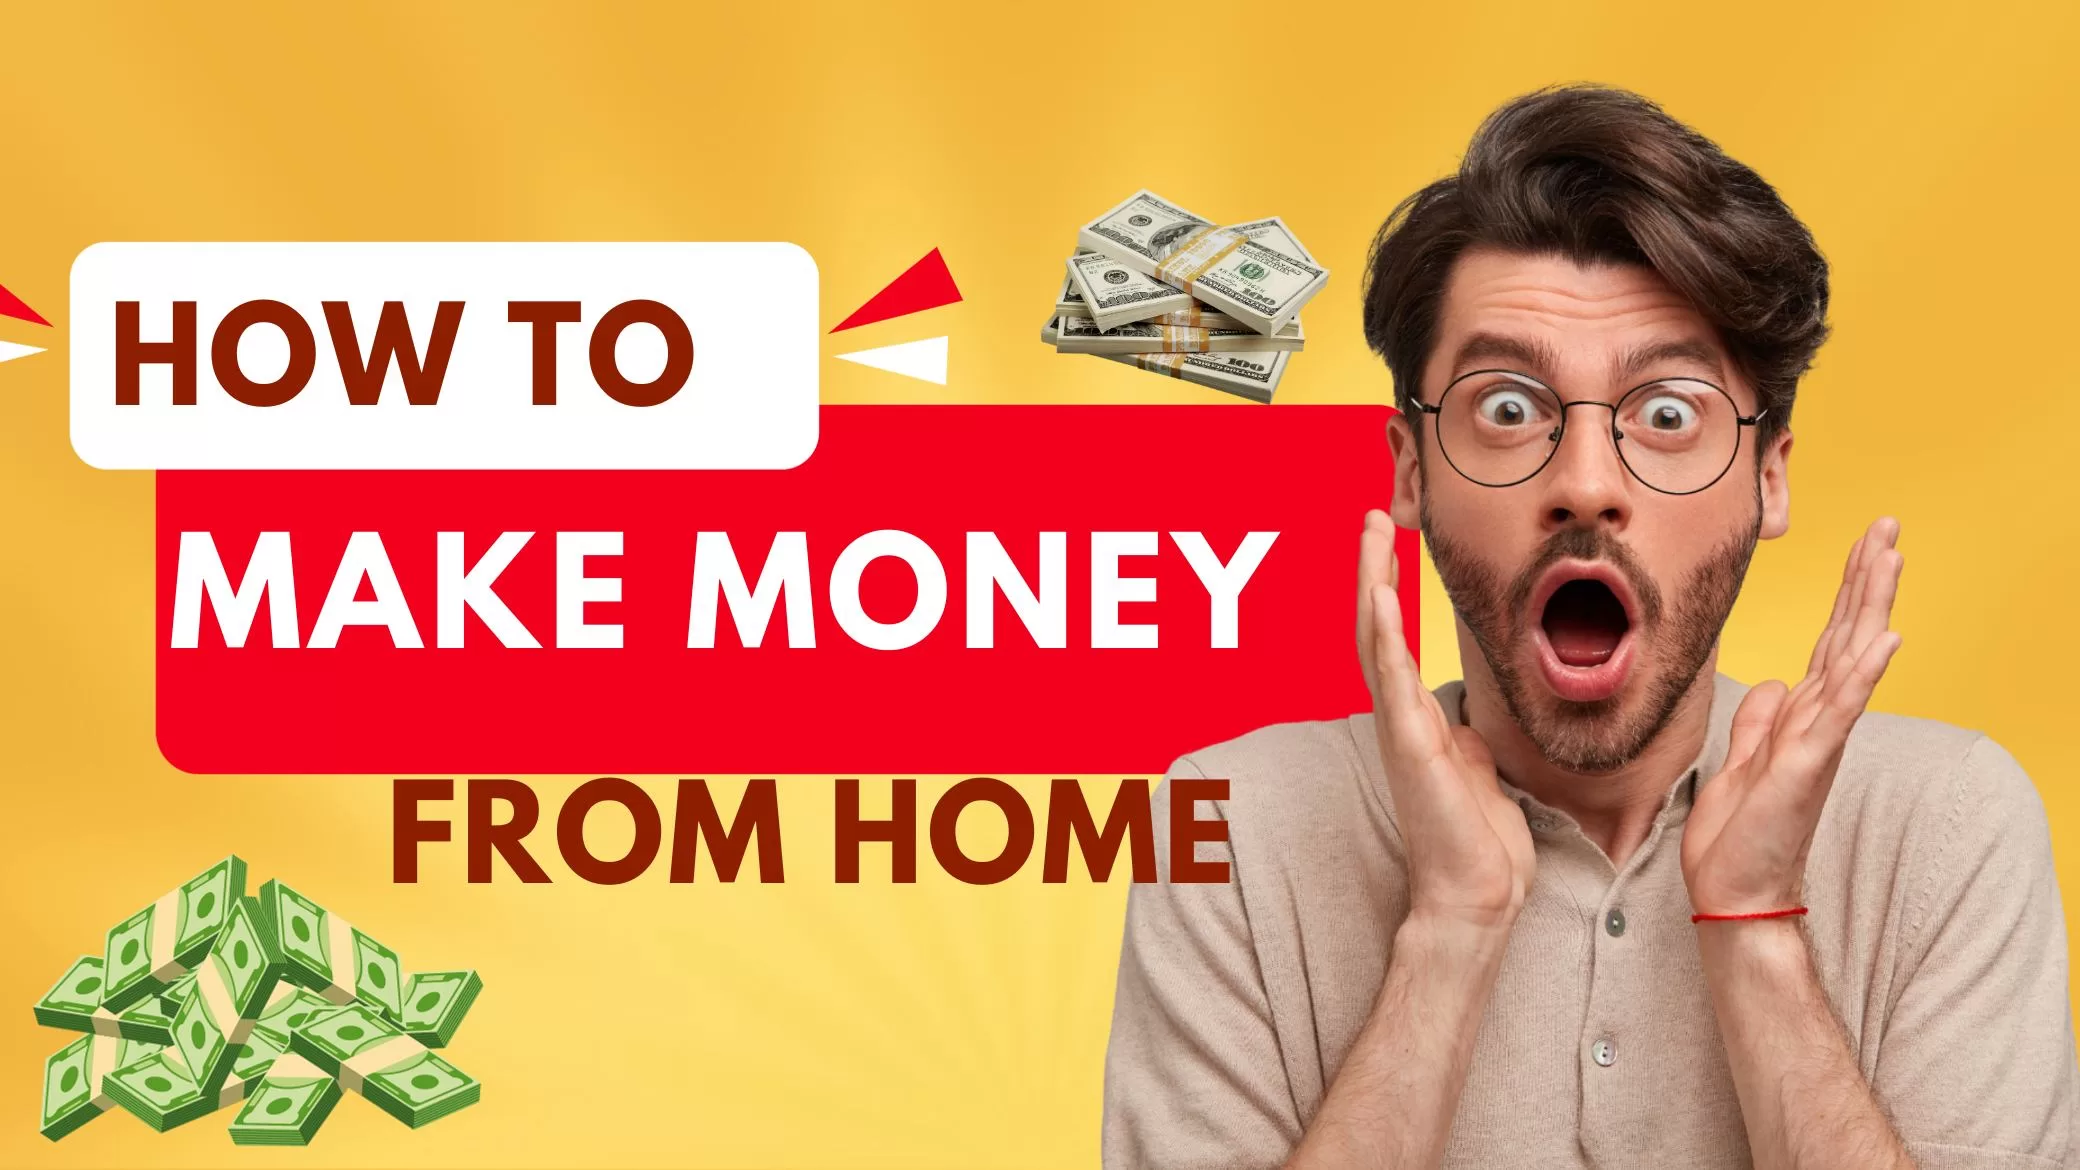 How to make passive income, How to make fast money online, how can i make money fast, how can i make money from home, How to earn extra money?, how can i earn money online, how to earn money from home without any investment, how to earn more money, how to earn passive income, how to make money today, how to generate passive income, how to make money on the internet, how do i make money,how do i make money online